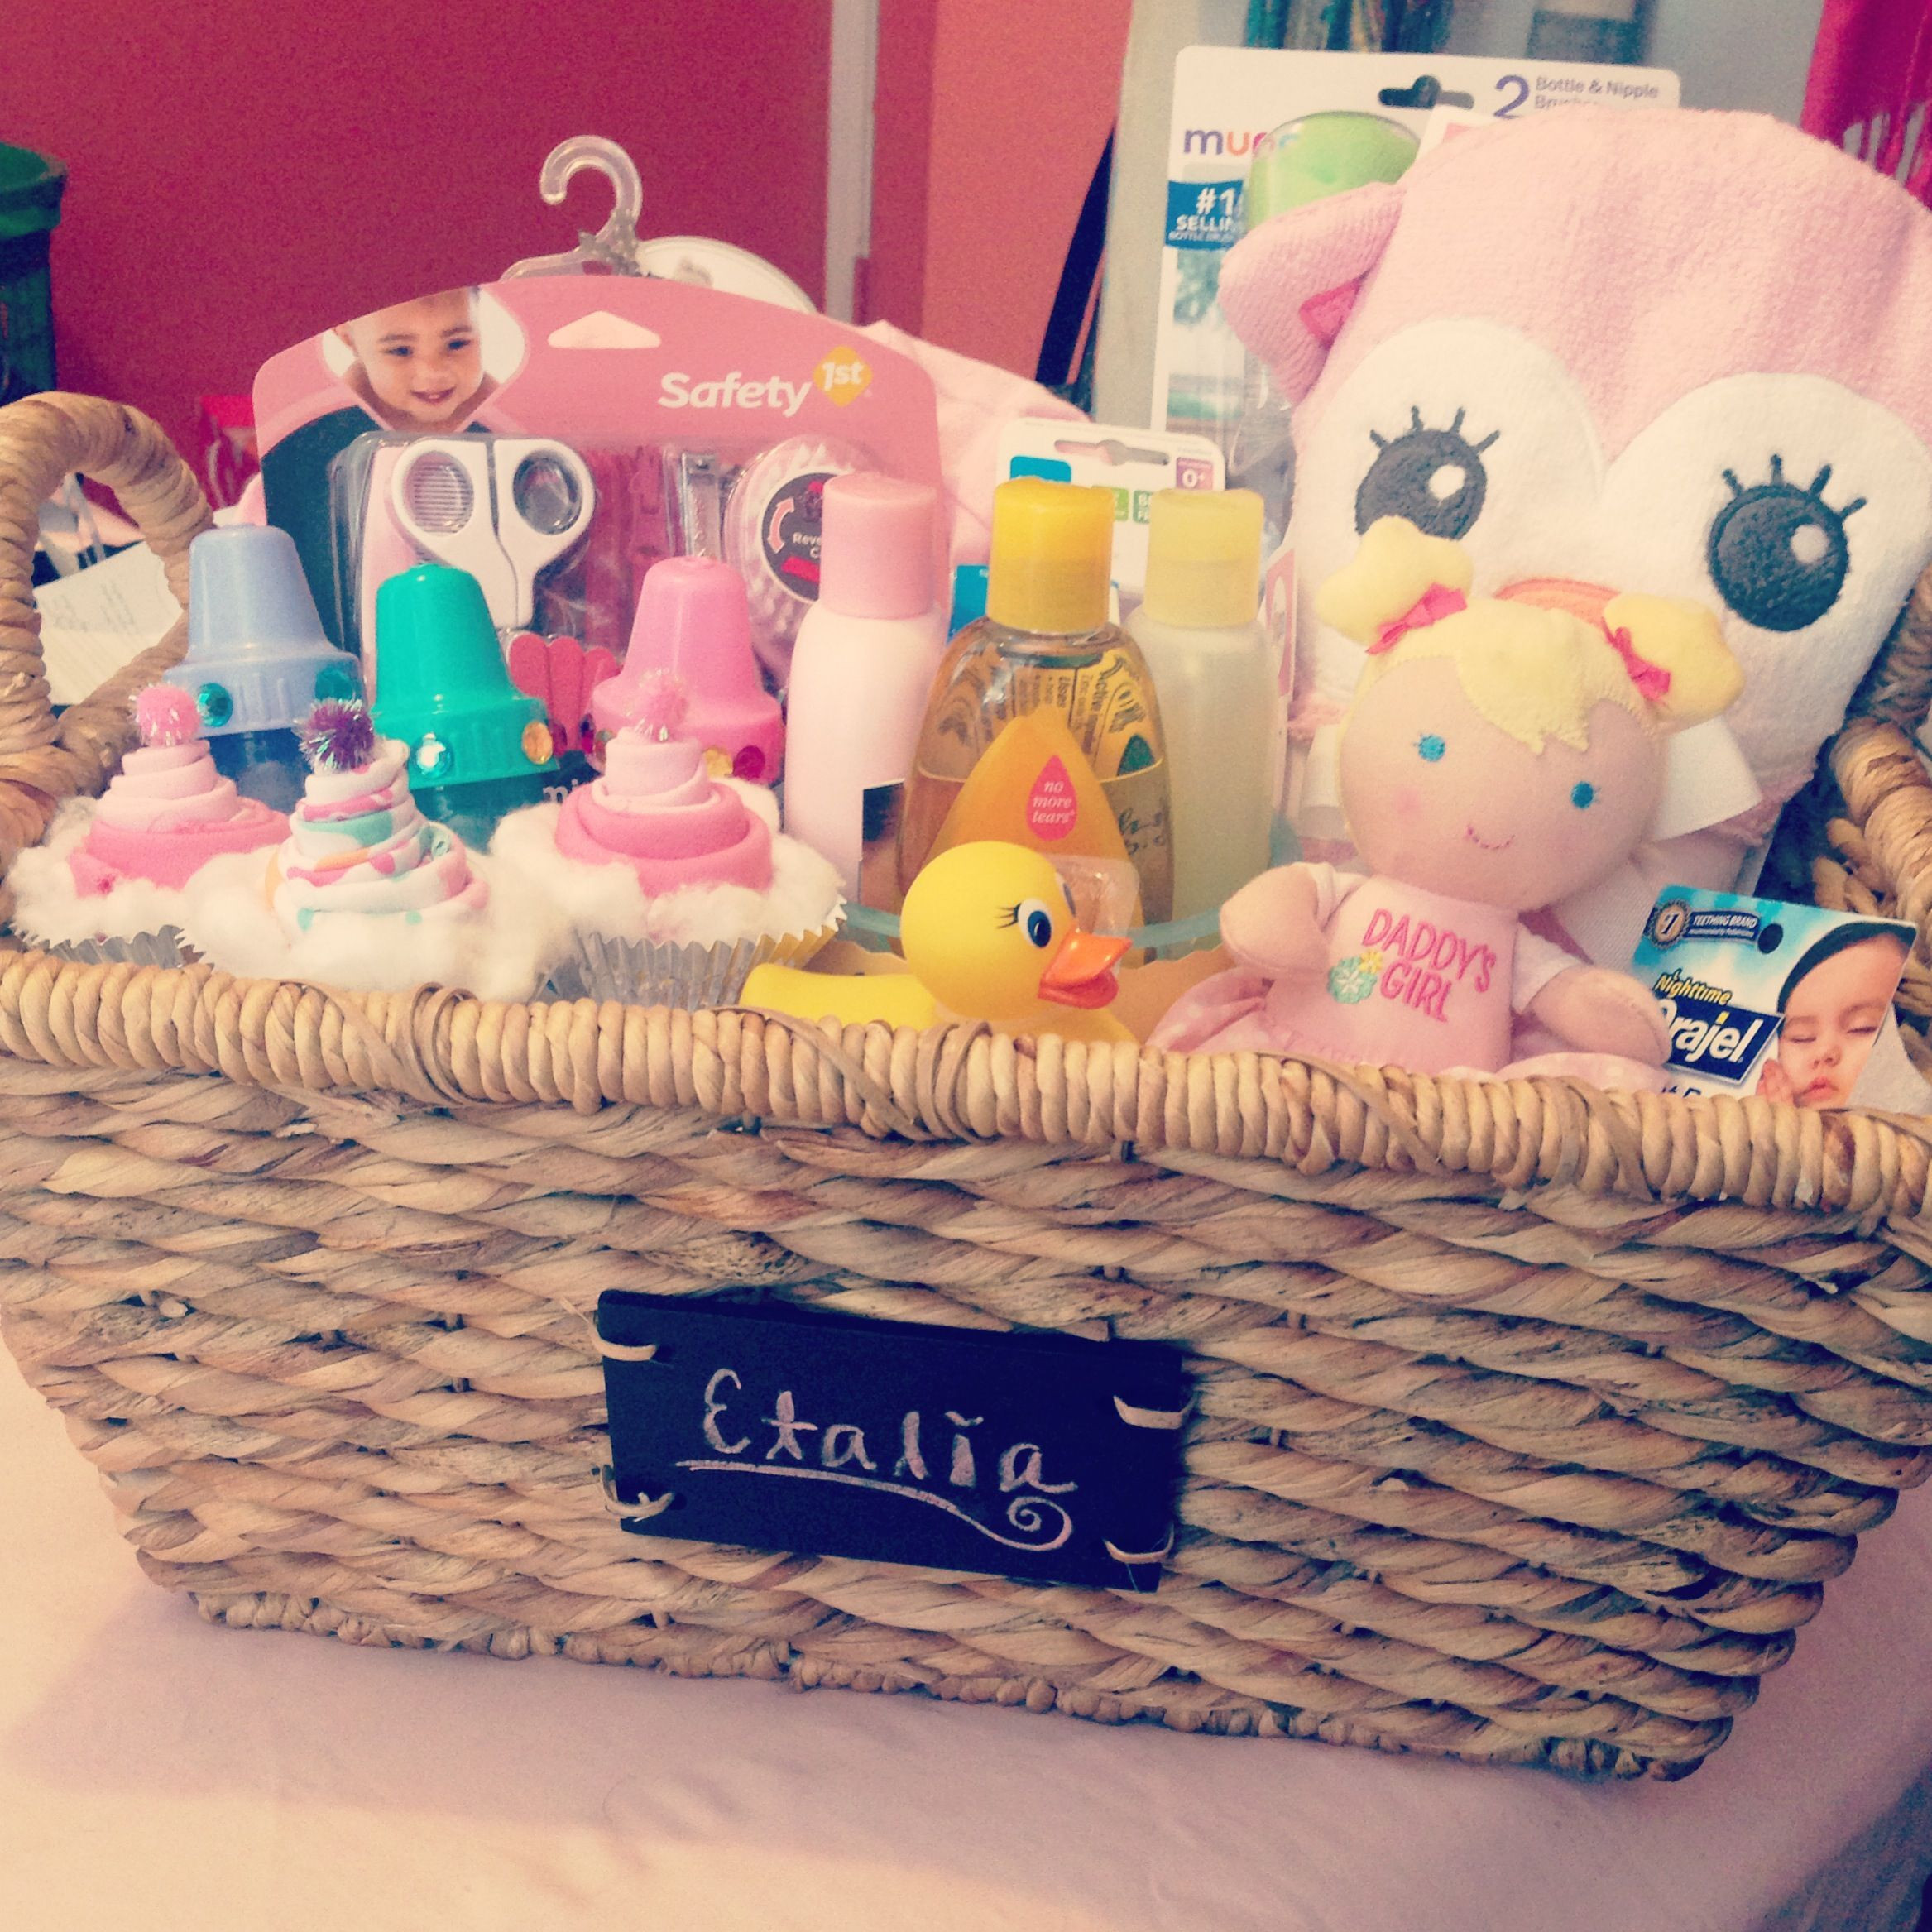 Cute Baby Shower Gift Basket Ideas
 Baby shower basket t idea for girl baby tbaskets